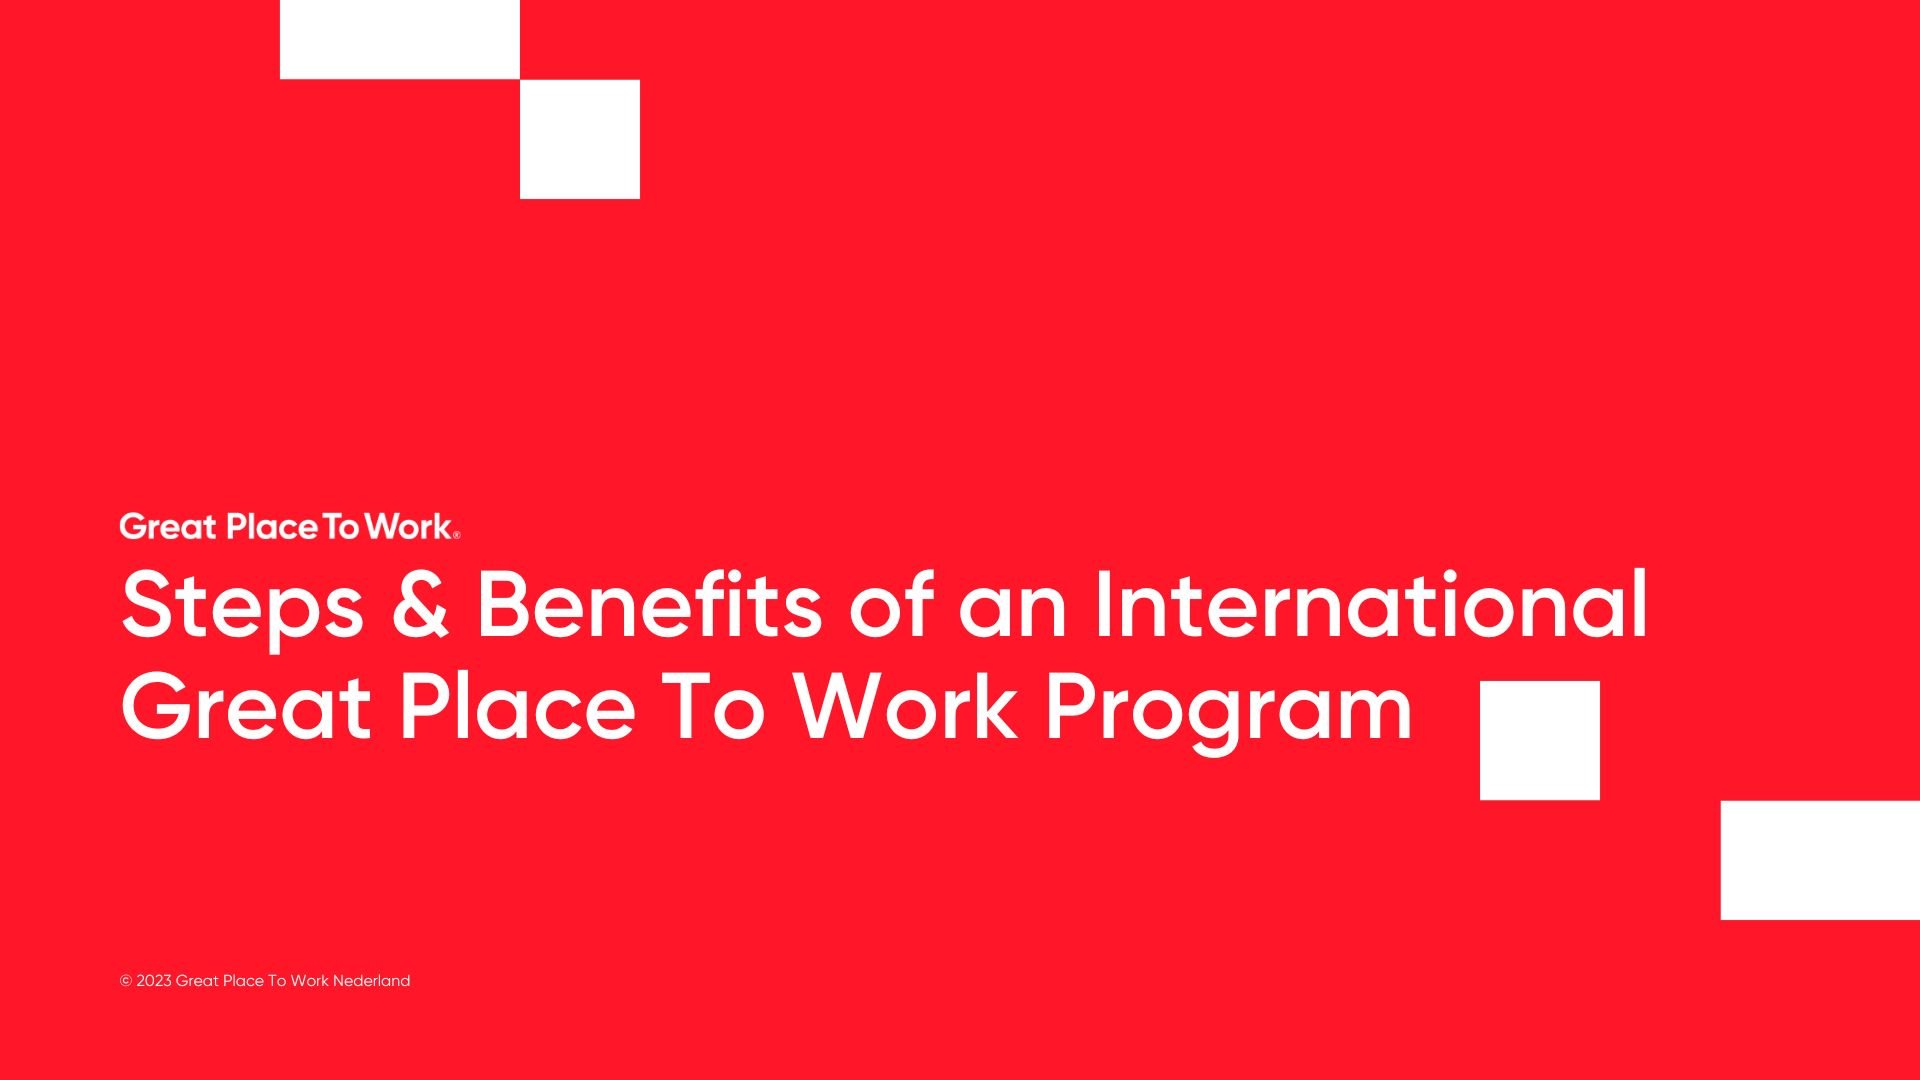 Steps & Benefits of an International Great Place To Work program 2023